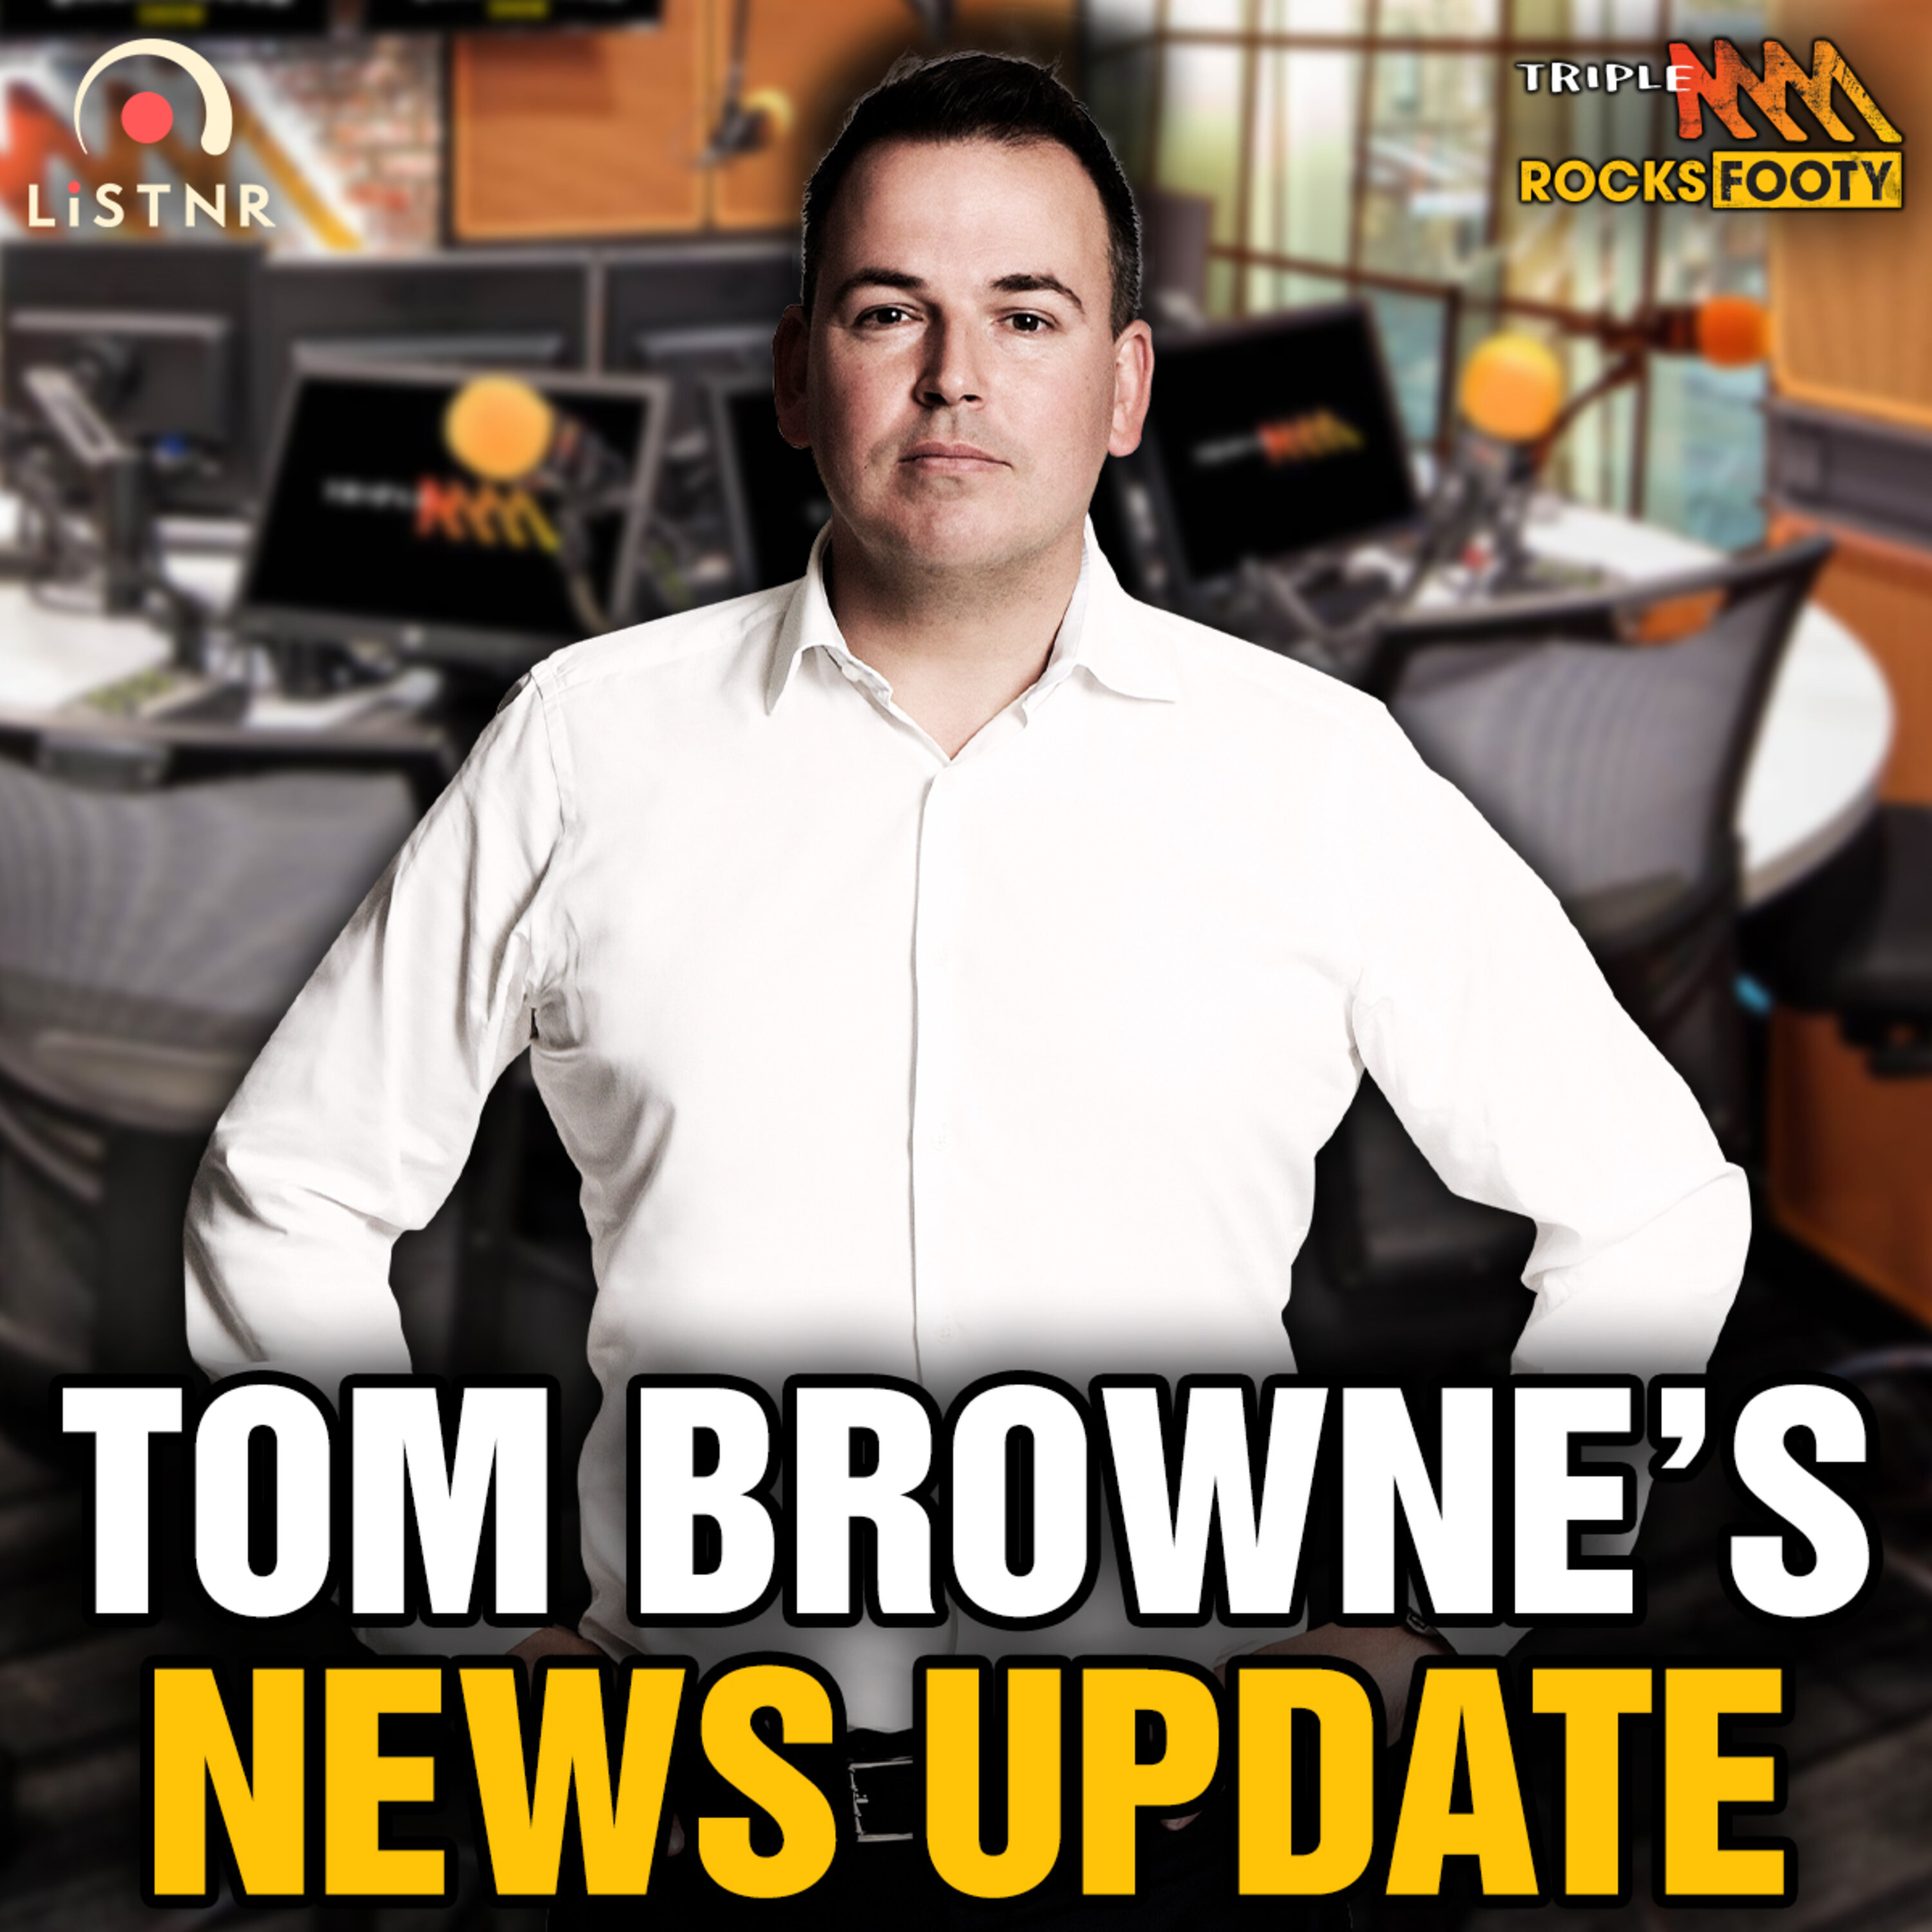 Tom Browne's News | Turmoil at Carlton and why the pressure on the Blues is self-inflicted, Tarryn Thomas back training with the seniors at North, fines for hair pulling and dacking